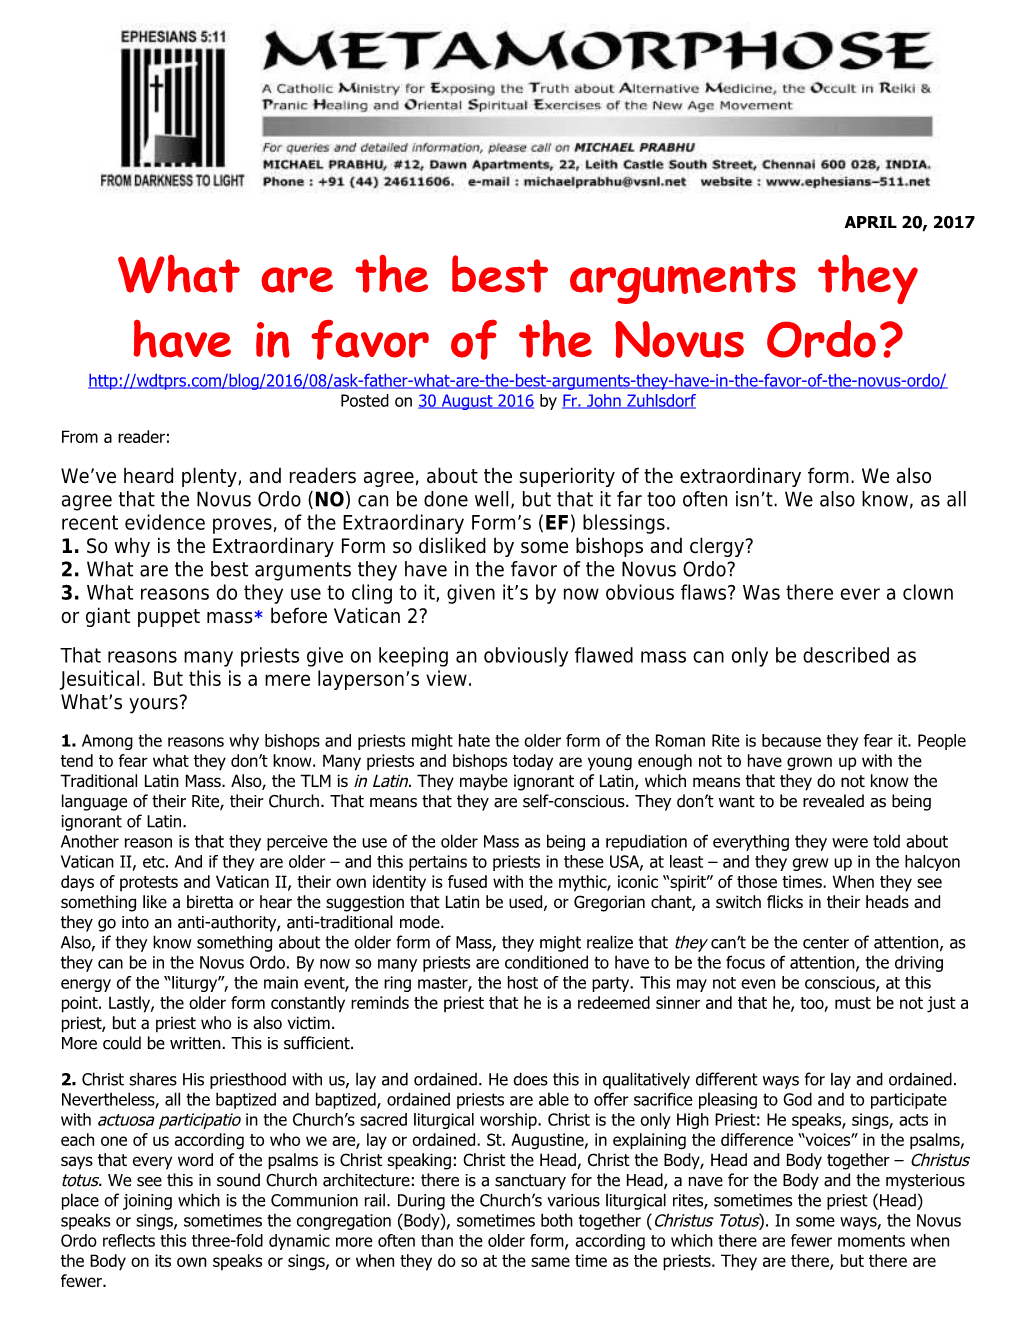 What Are the Best Arguments They Have in Favor of the Novus Ordo?